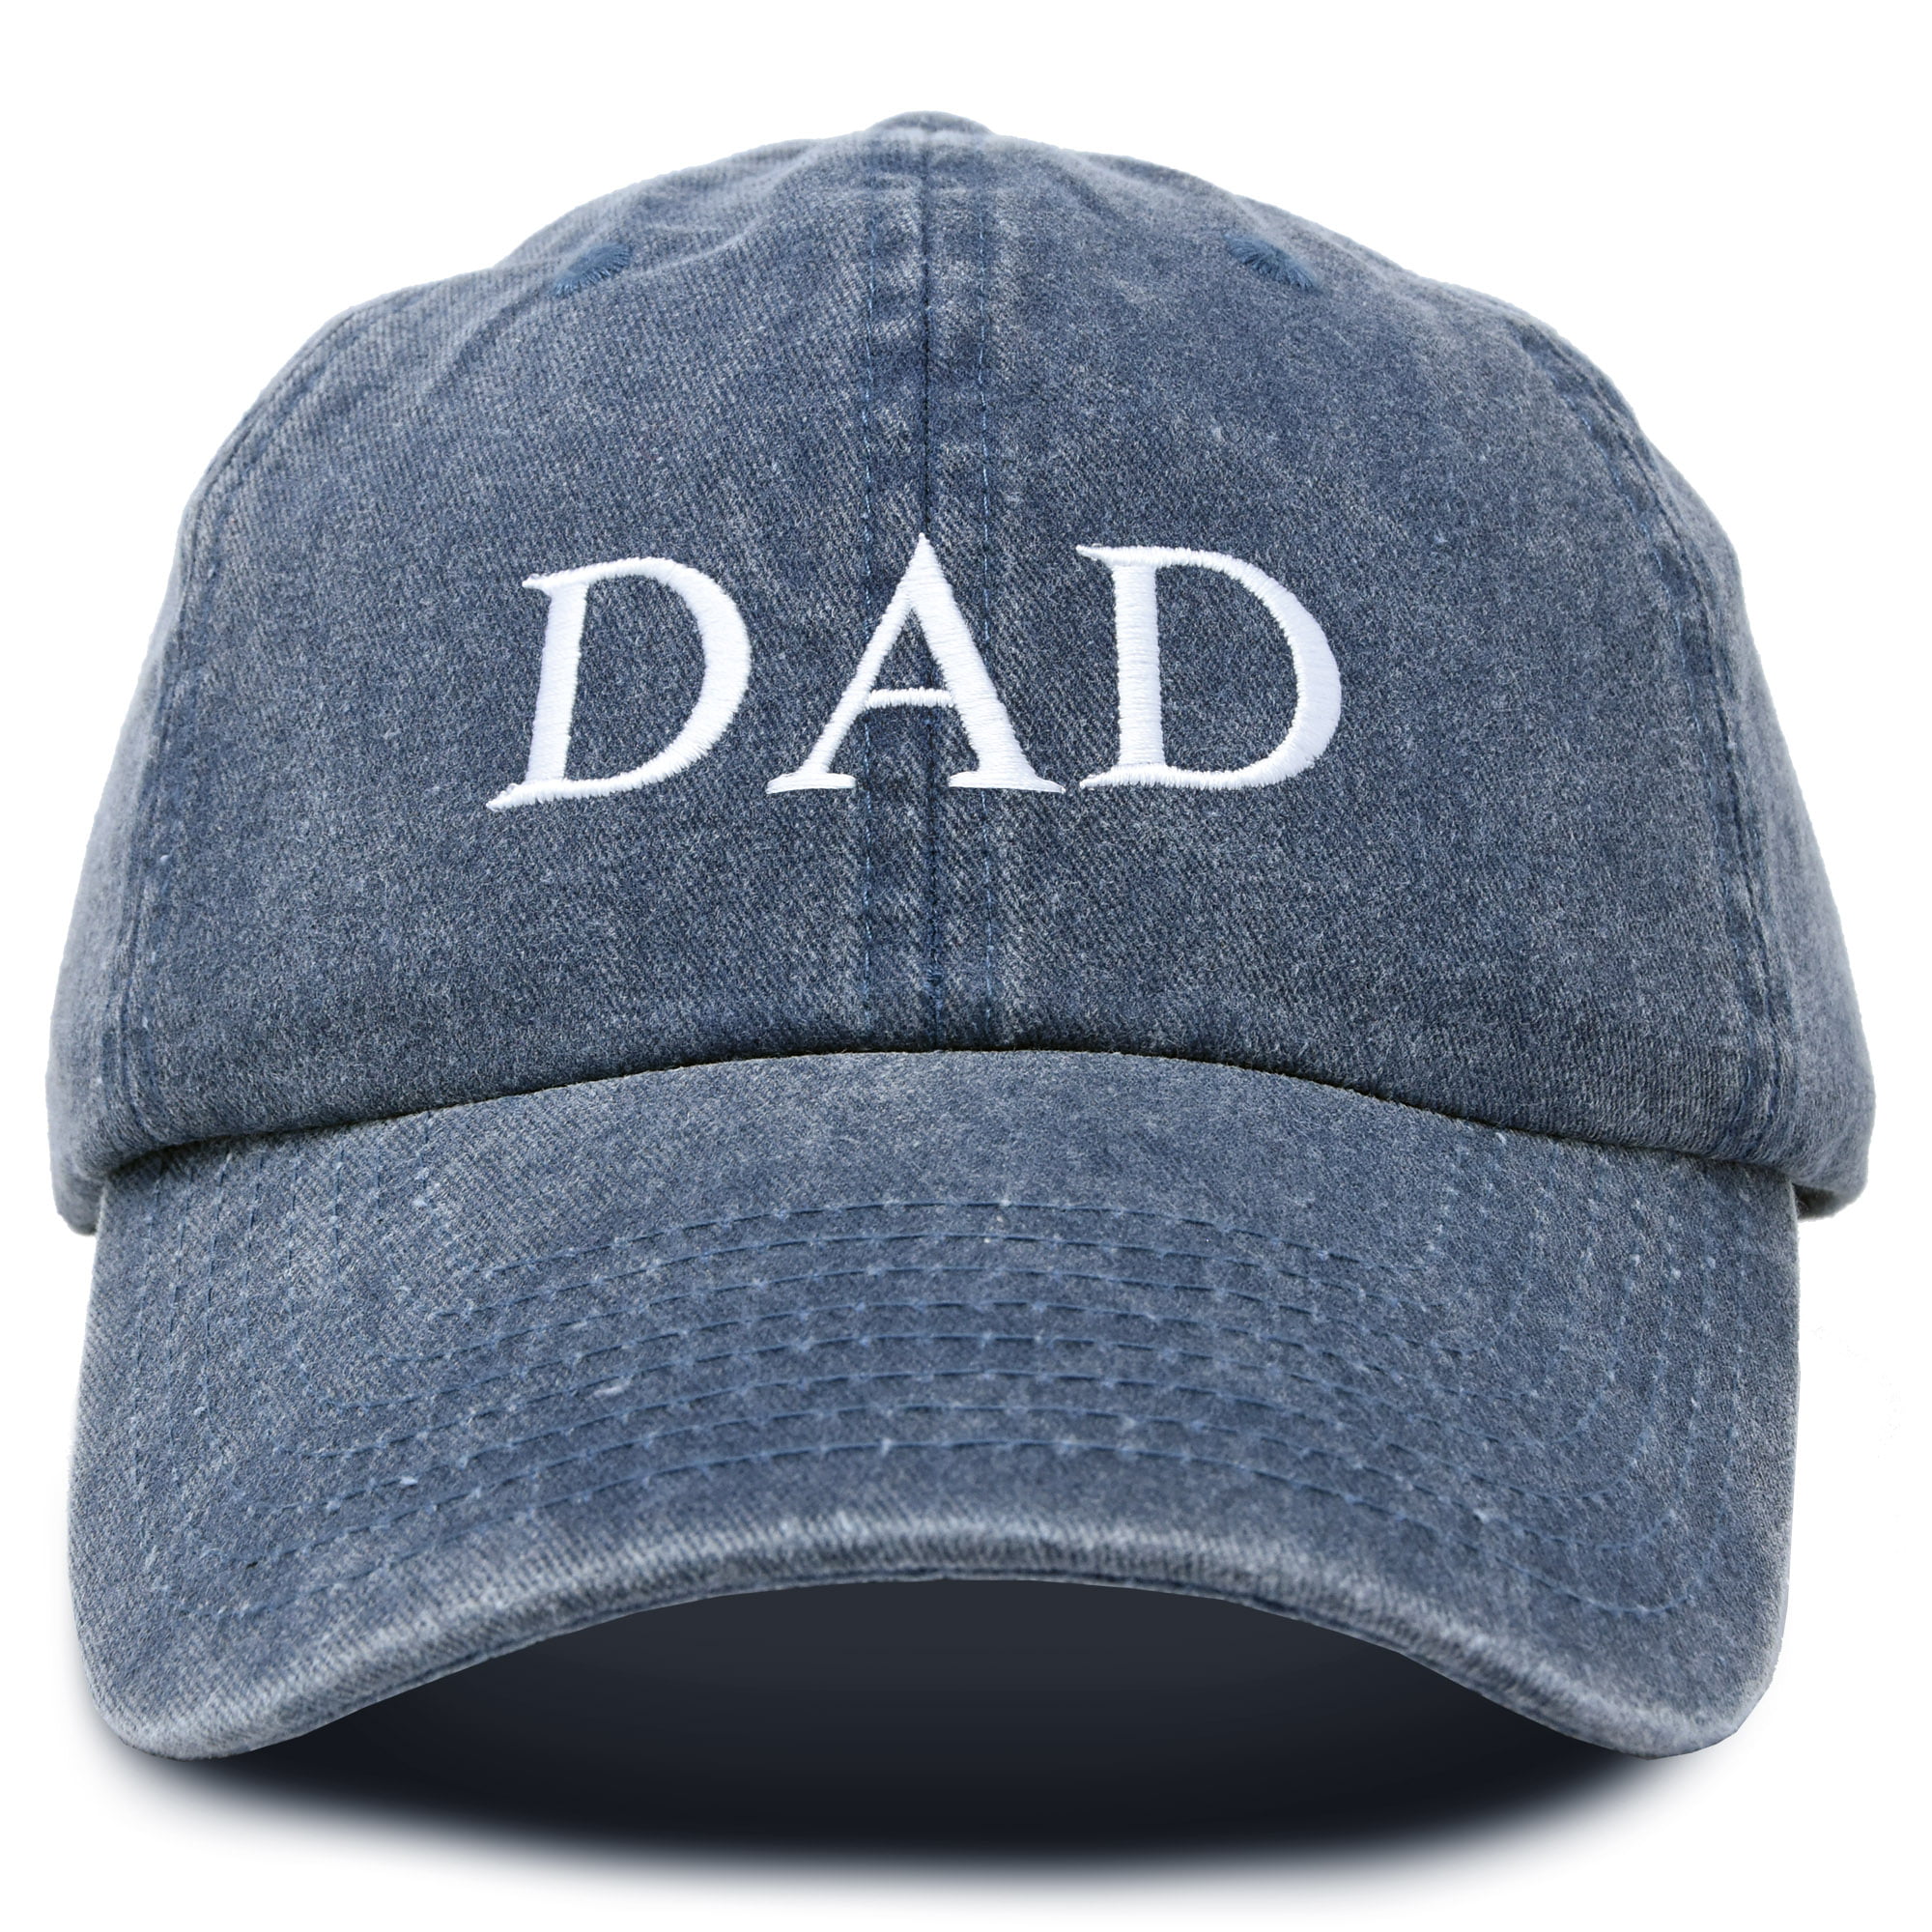 DALIX Men's Embroidered Dad Hat Soft Washed Cotton Baseball Cap in Washed  Navy